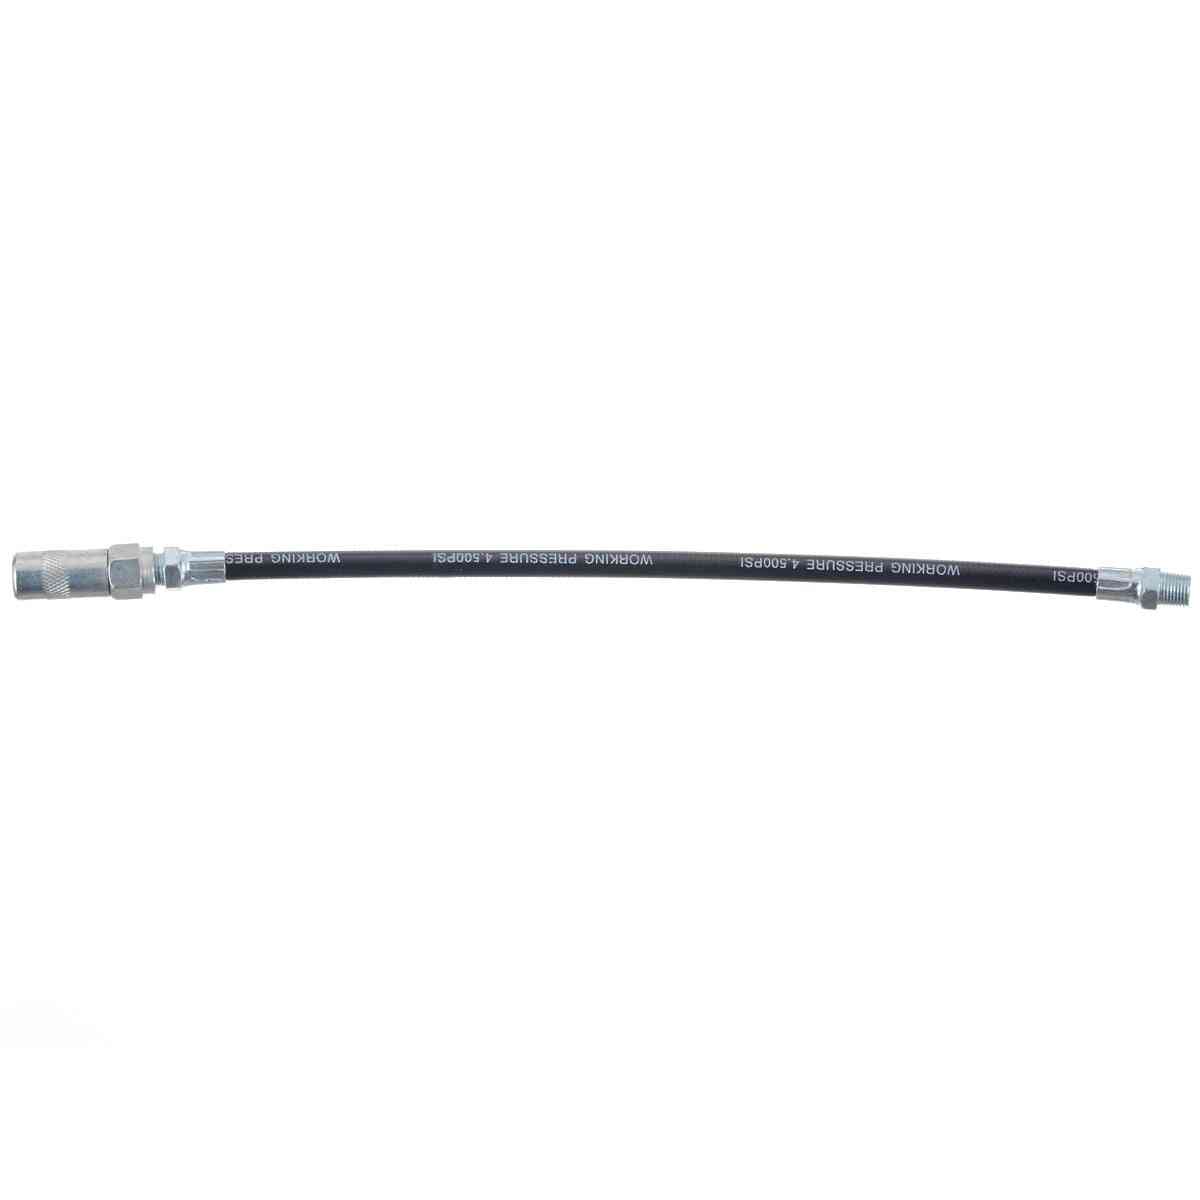 High Pressure Long Extension Whip Hosepipe For Manual Grease